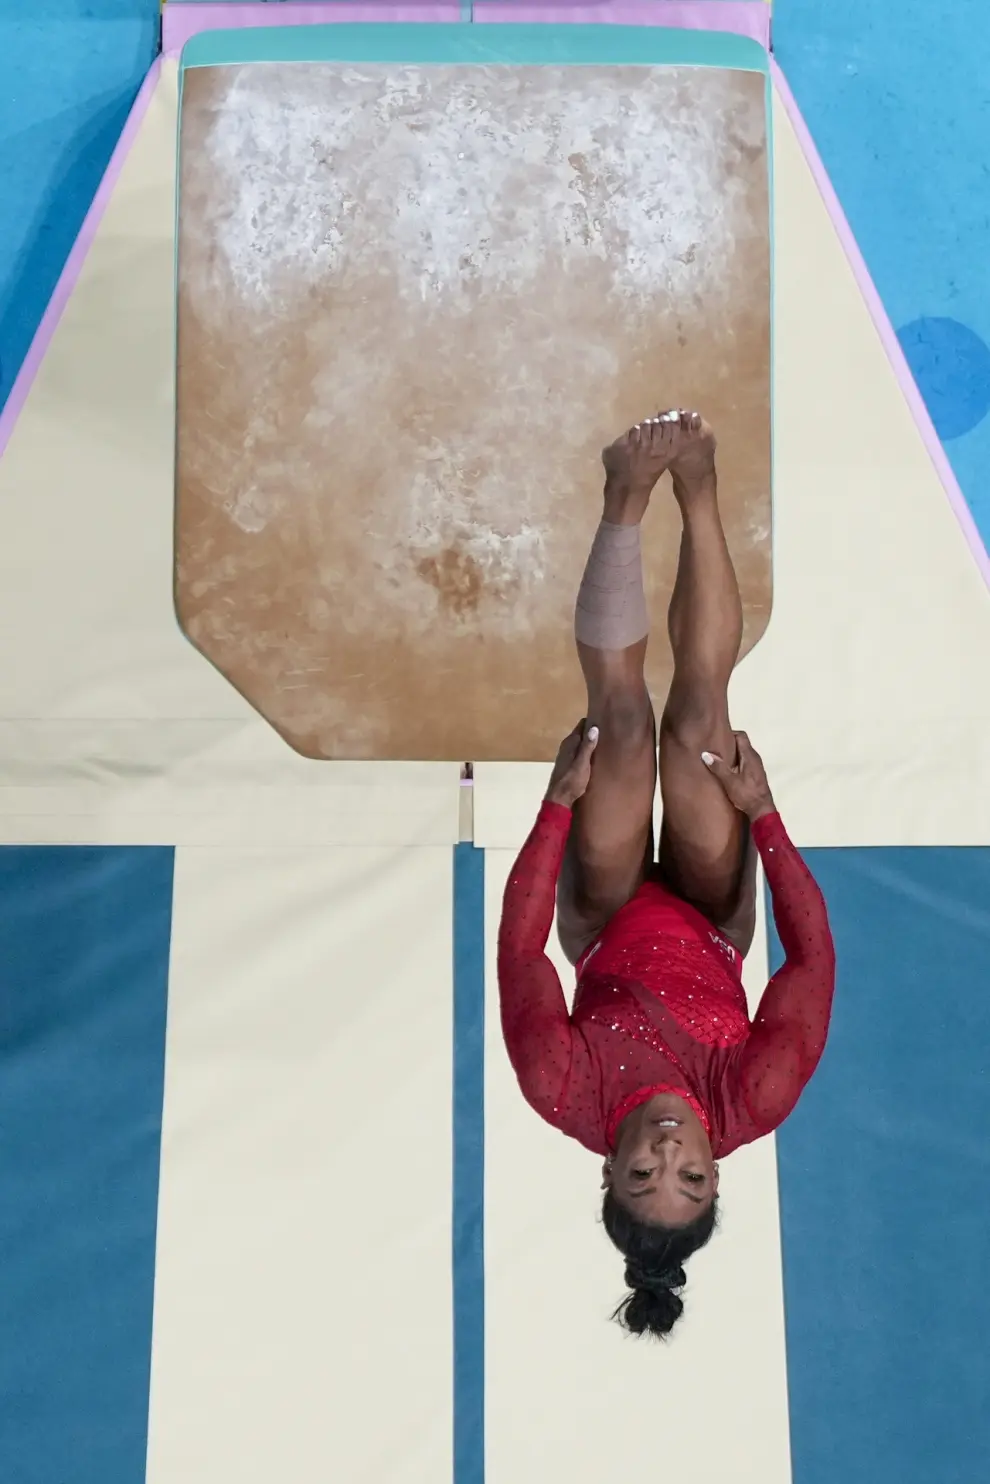 Simone Biles, of the United States, performs on the vault during the women's artistic gymnastics individual vault finals in Bercy Arena at the 2024 Summer Olympics, Saturday, Aug. 3, 2024, in Paris, France. (AP Photo/Morry Gash)